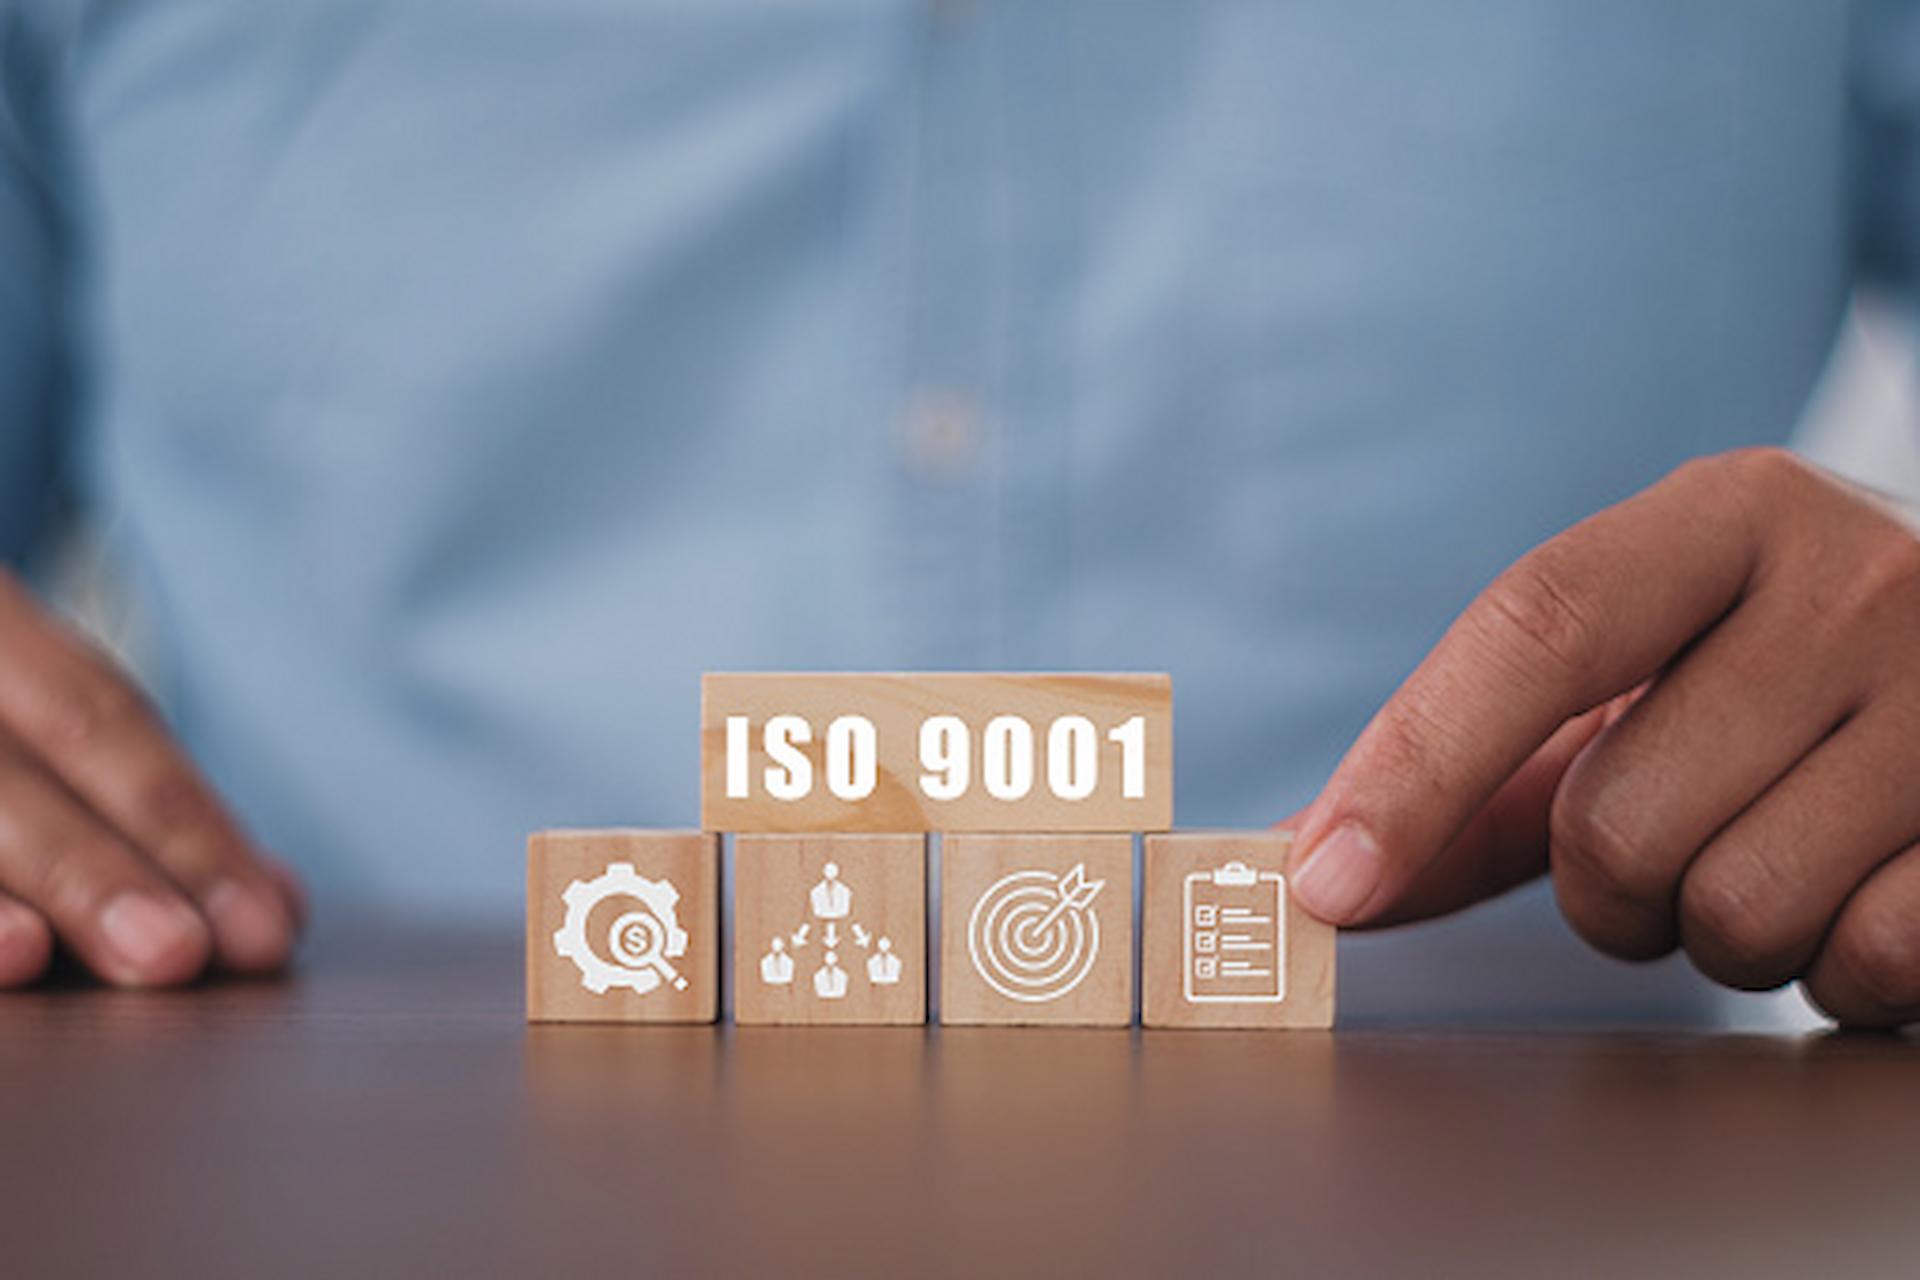 What Are The Major Reasons To Get ISO 9001 Certification?